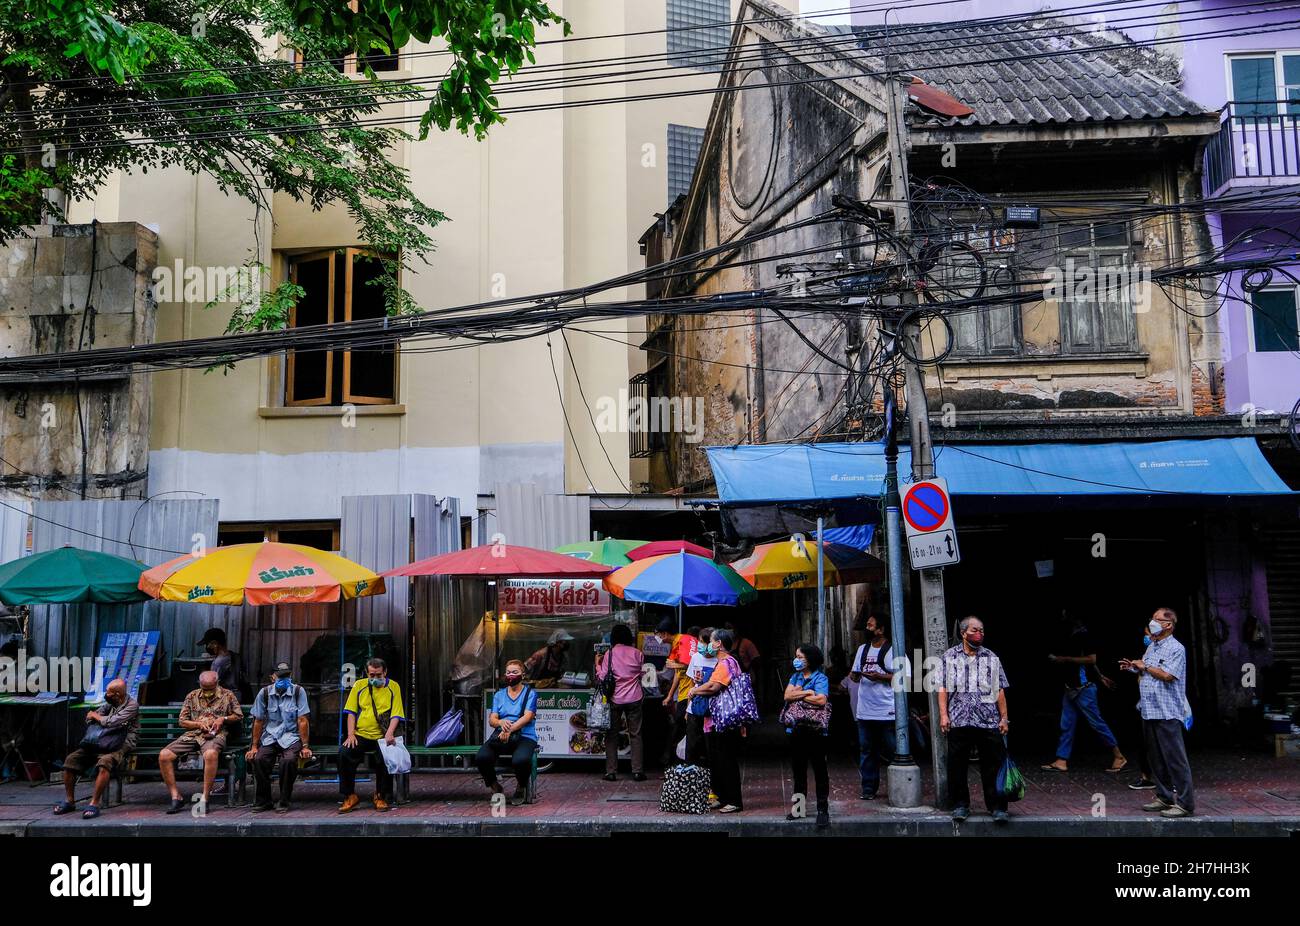 People of all ages wait at a bus stop in Chinatown, Bangkok, Thailand Stock Photo